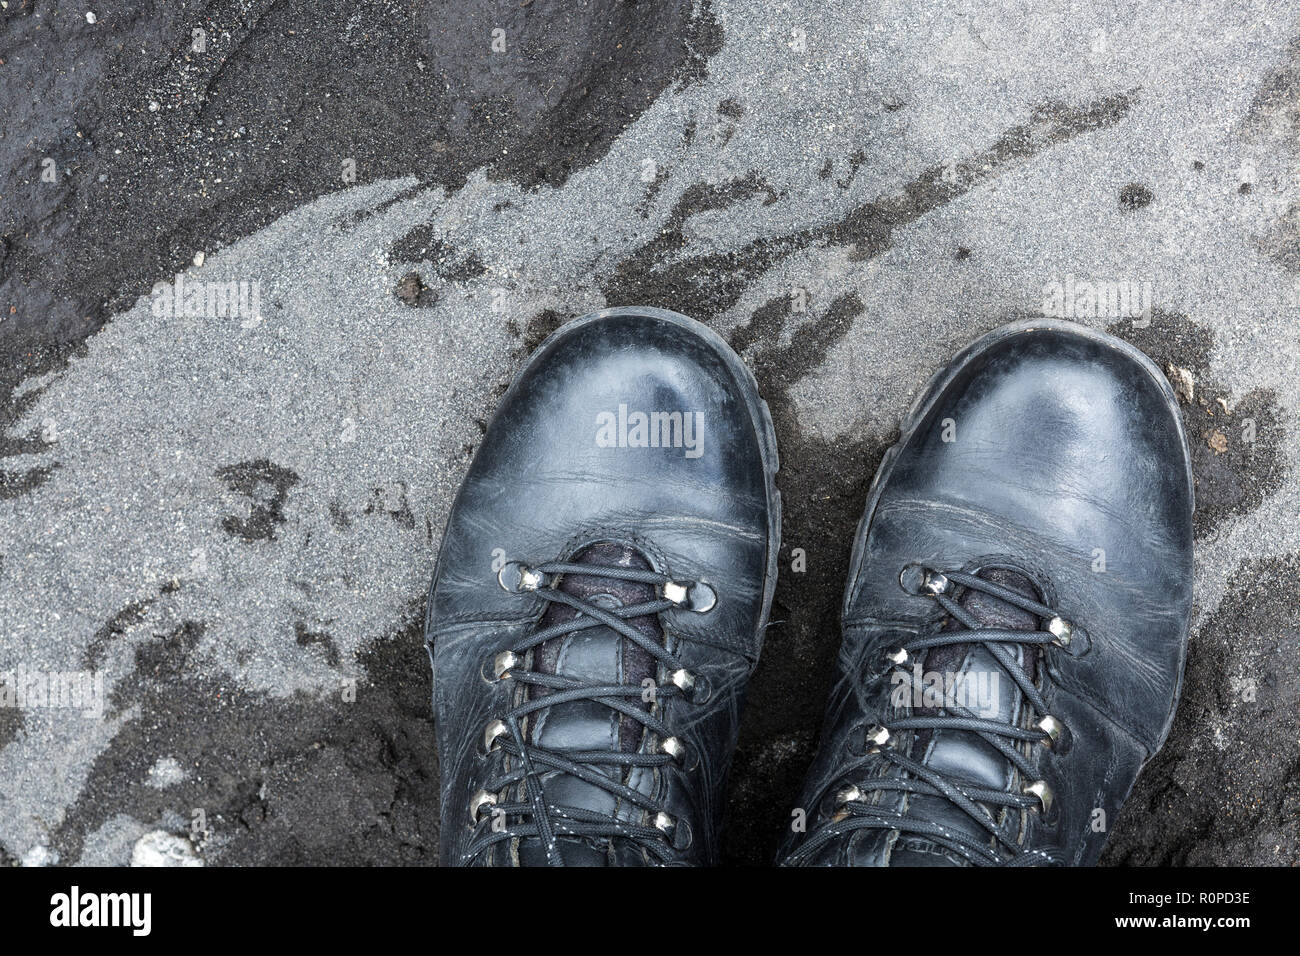 Two black walking boots standing on volcanic soil, Paso de Cortes, Iztaccihuatl Popocatepetl National Park, Mexico, North America Stock Photo